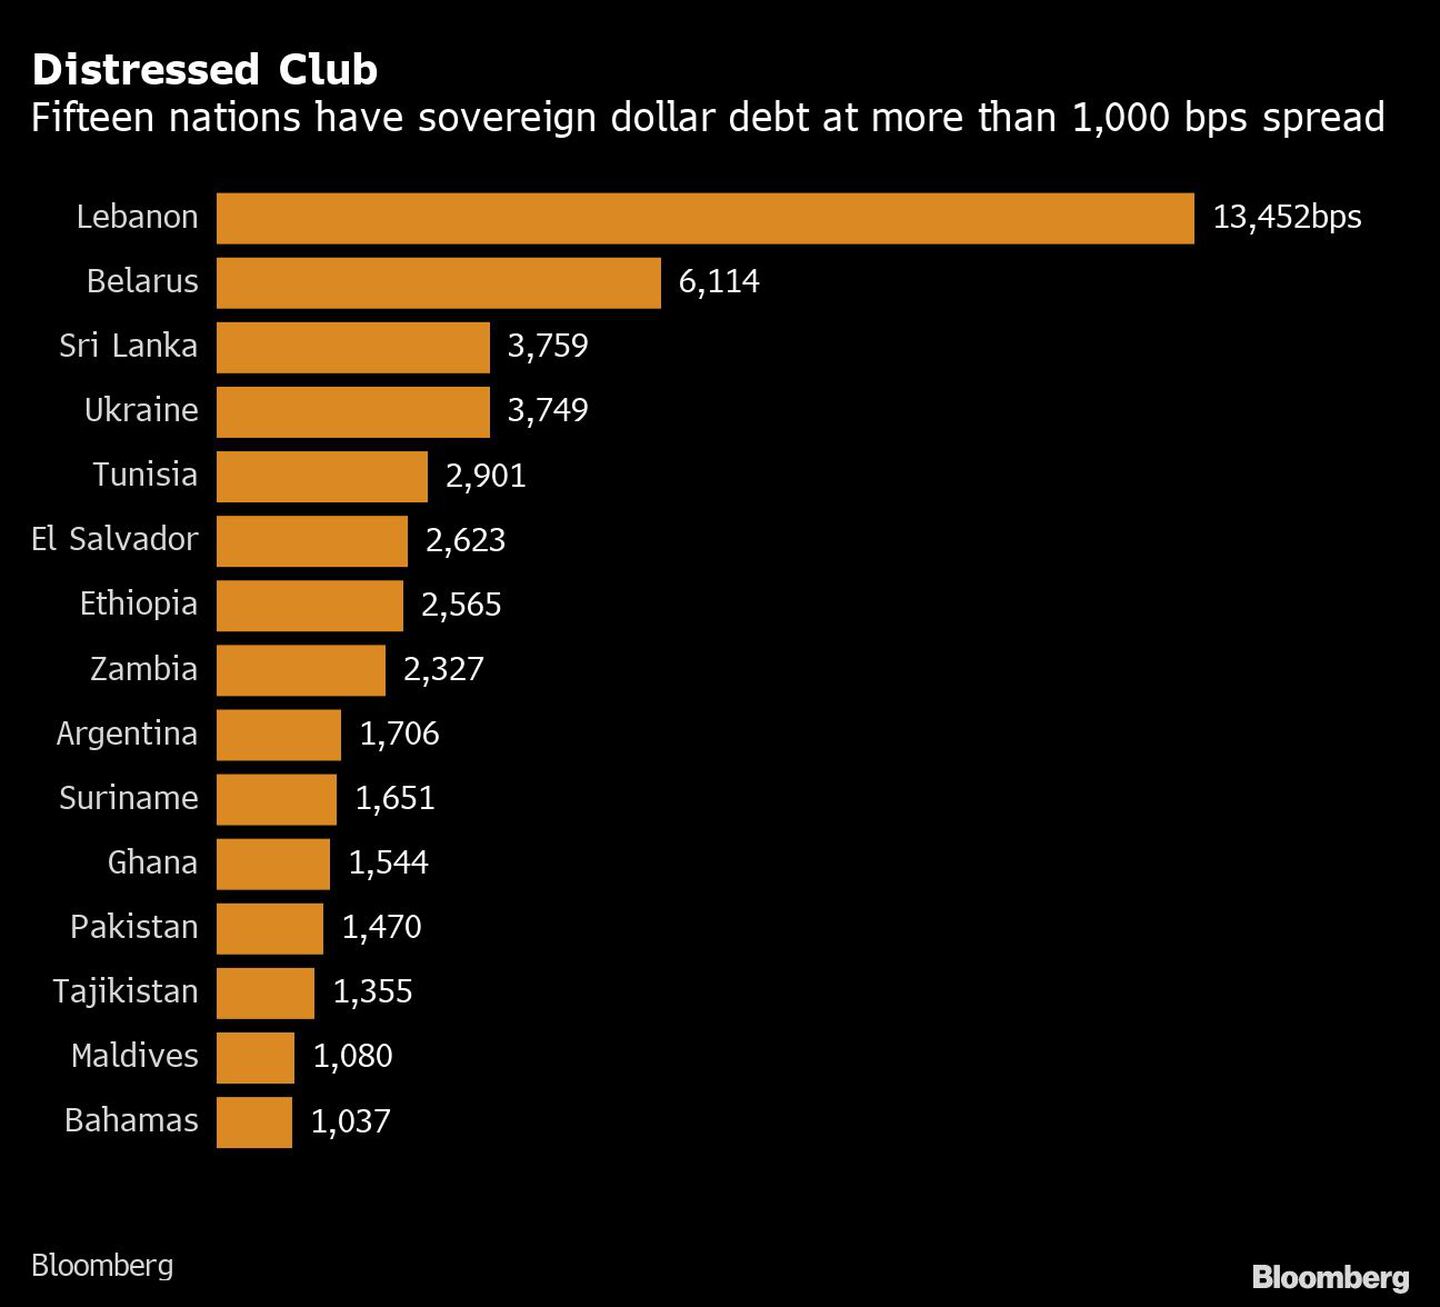 Distressed Club | Fifteen nations have sovereign dollar debt at more than 1,000 bps spreaddfd